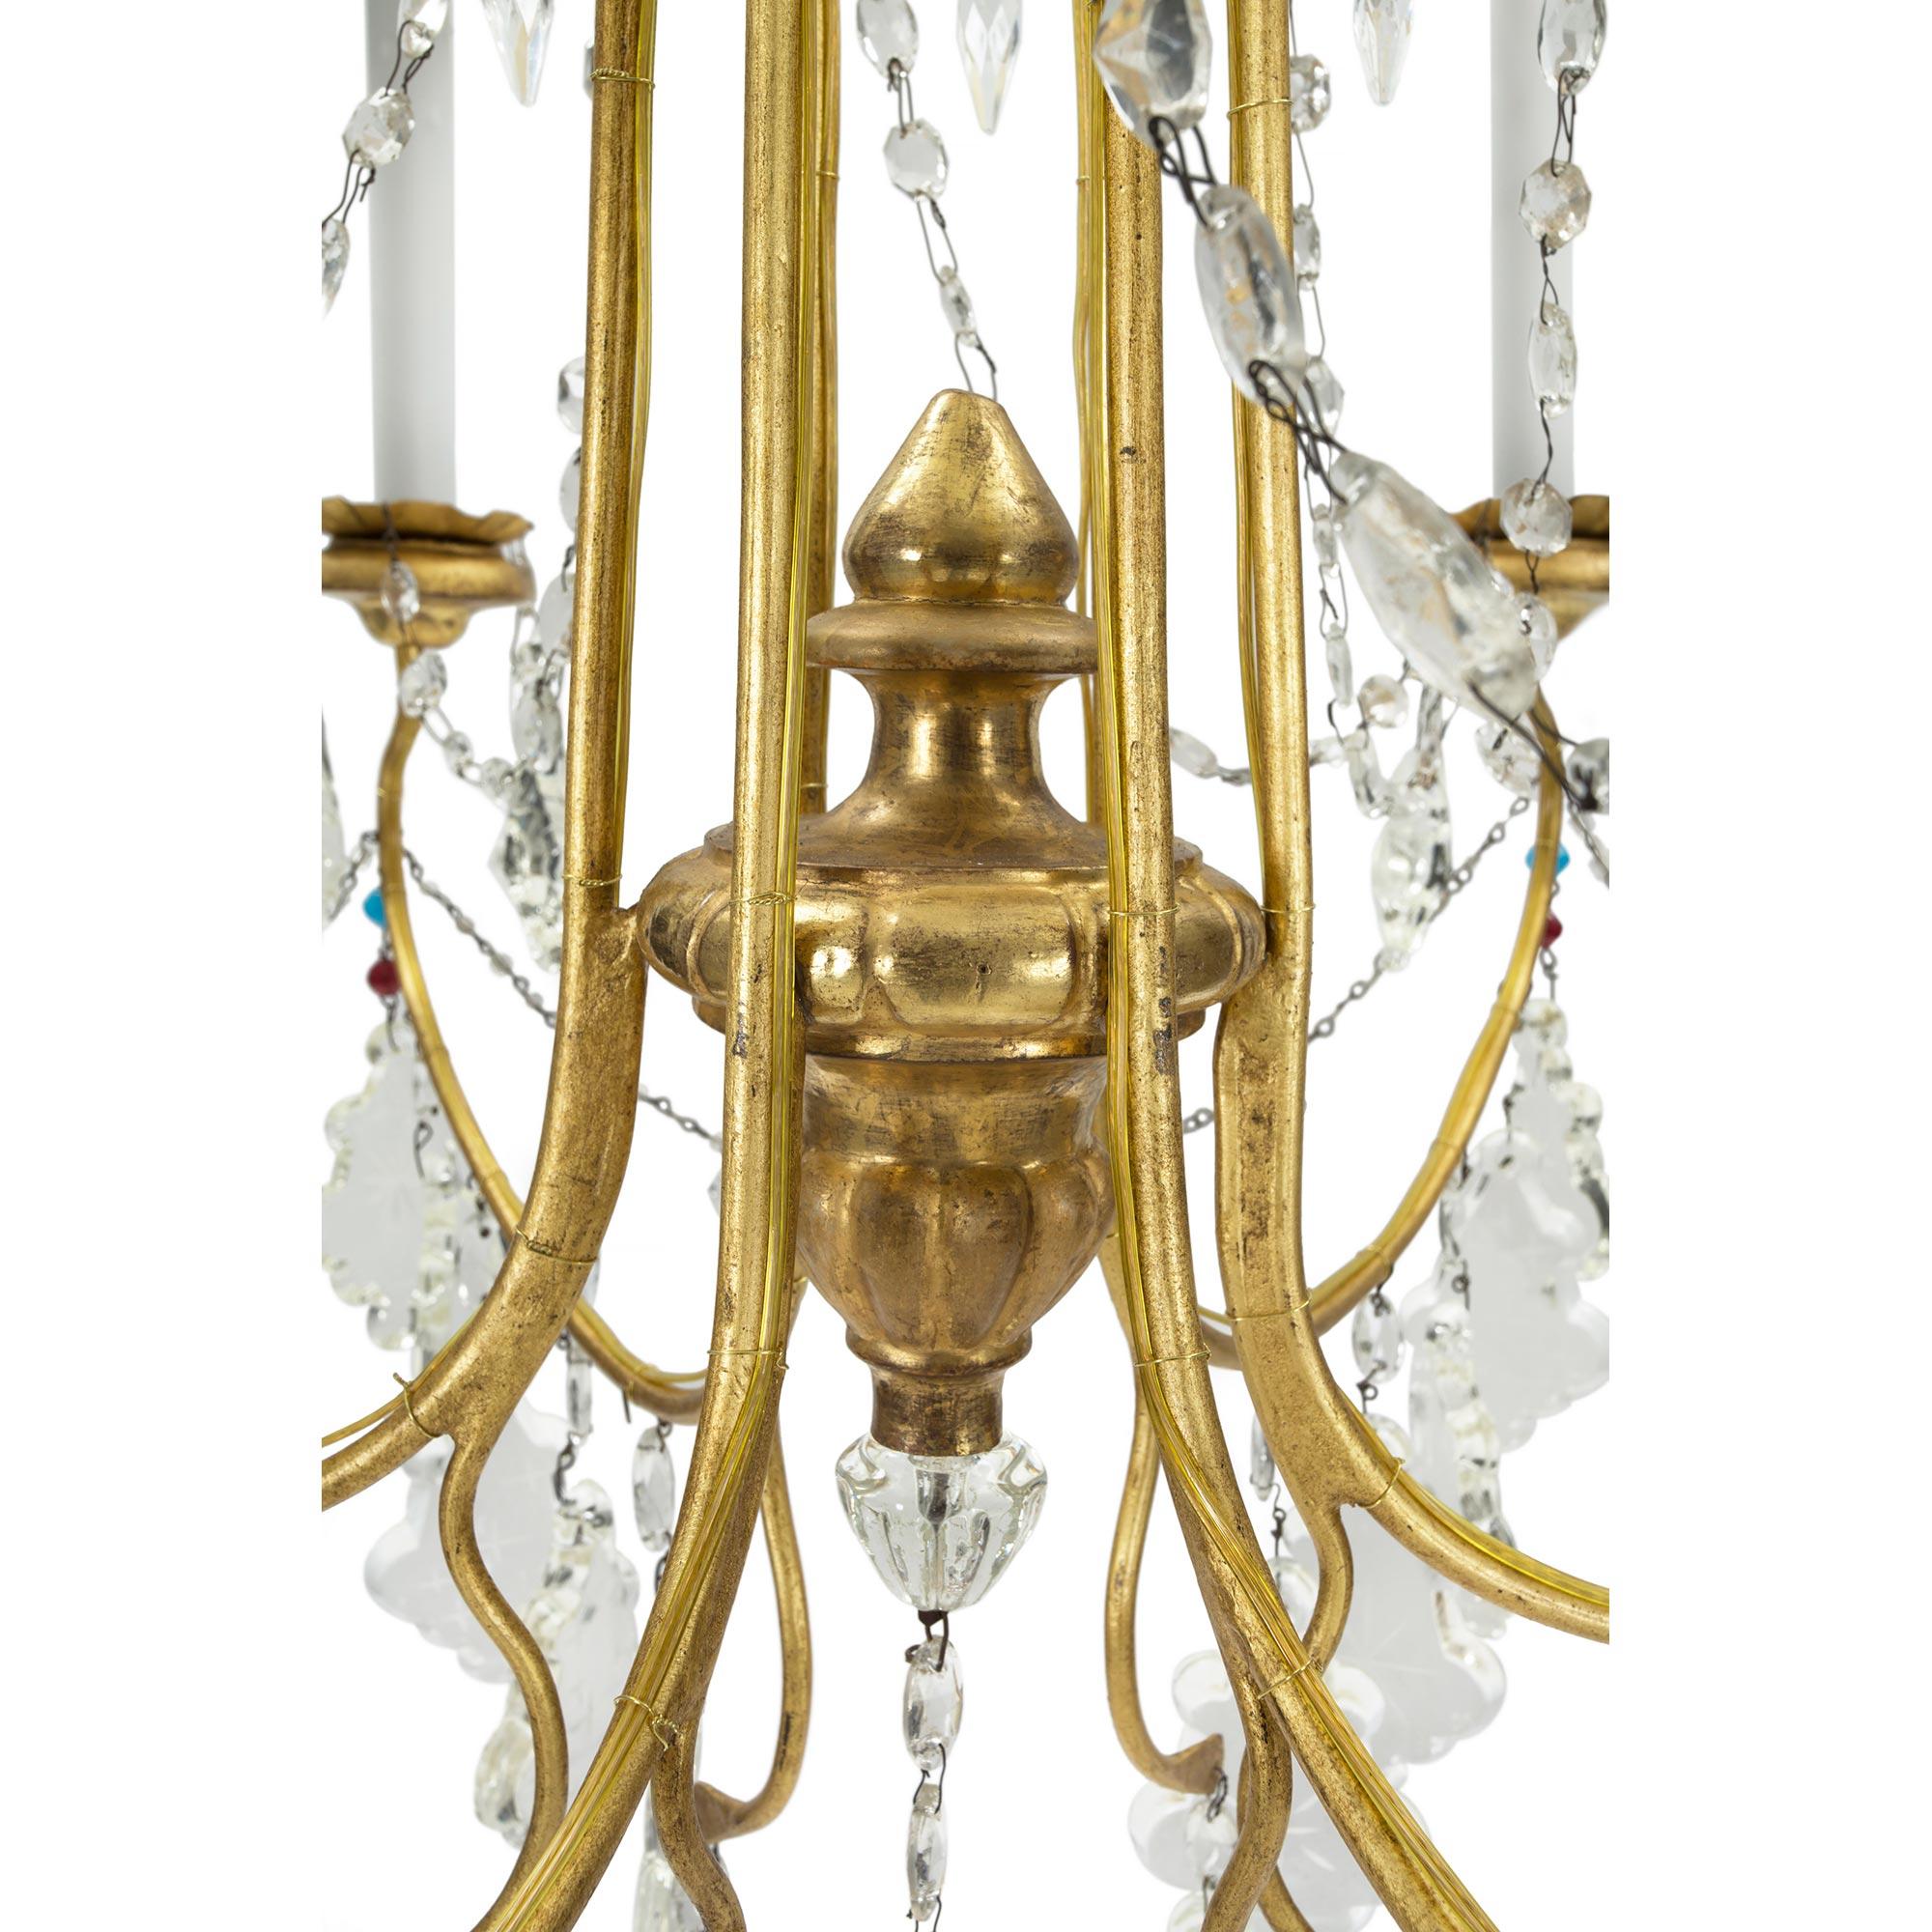 Italian 19th Century Six Light Gilt Metal, Giltwood and Crystal Genovese Chandel For Sale 1